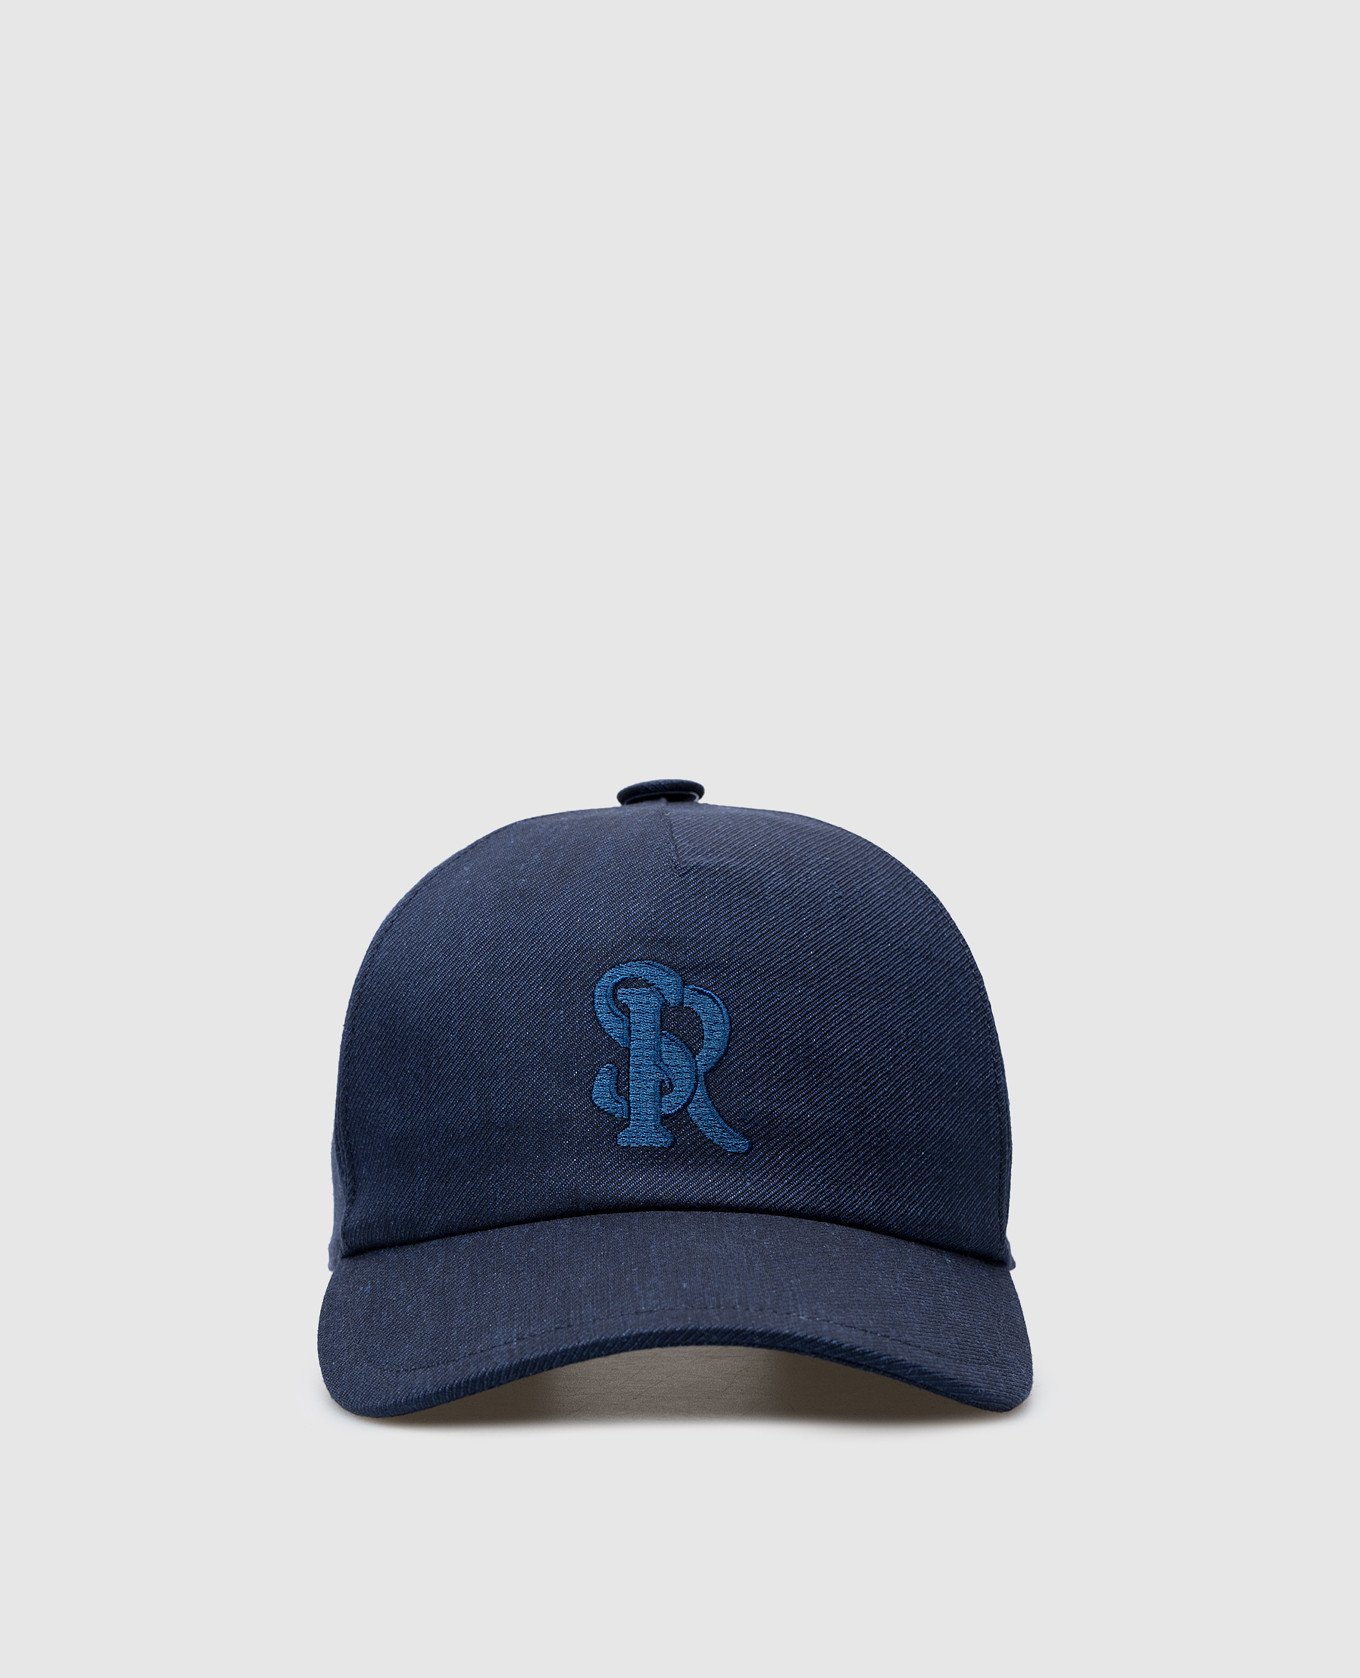 Blue linen and wool cap with logo monogram embroidery